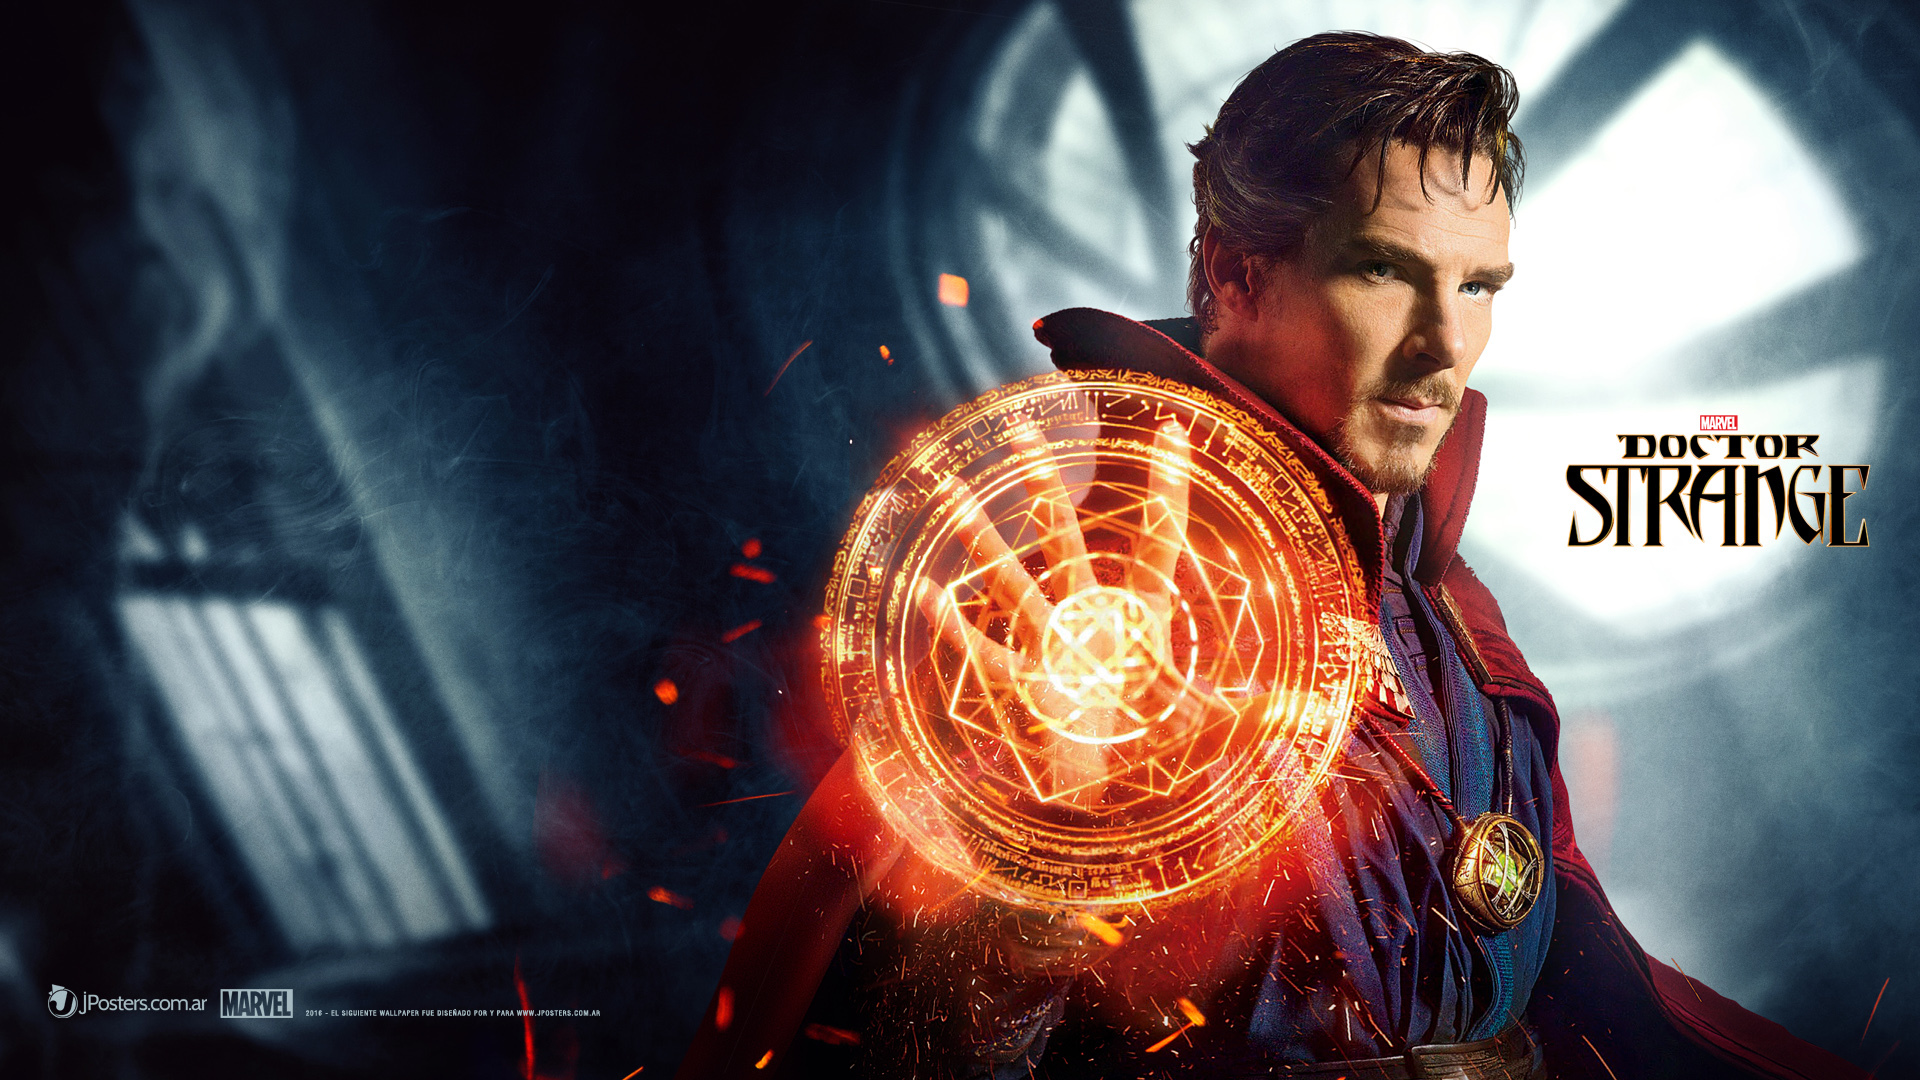 290+ Benedict Cumberbatch HD Wallpapers and Backgrounds